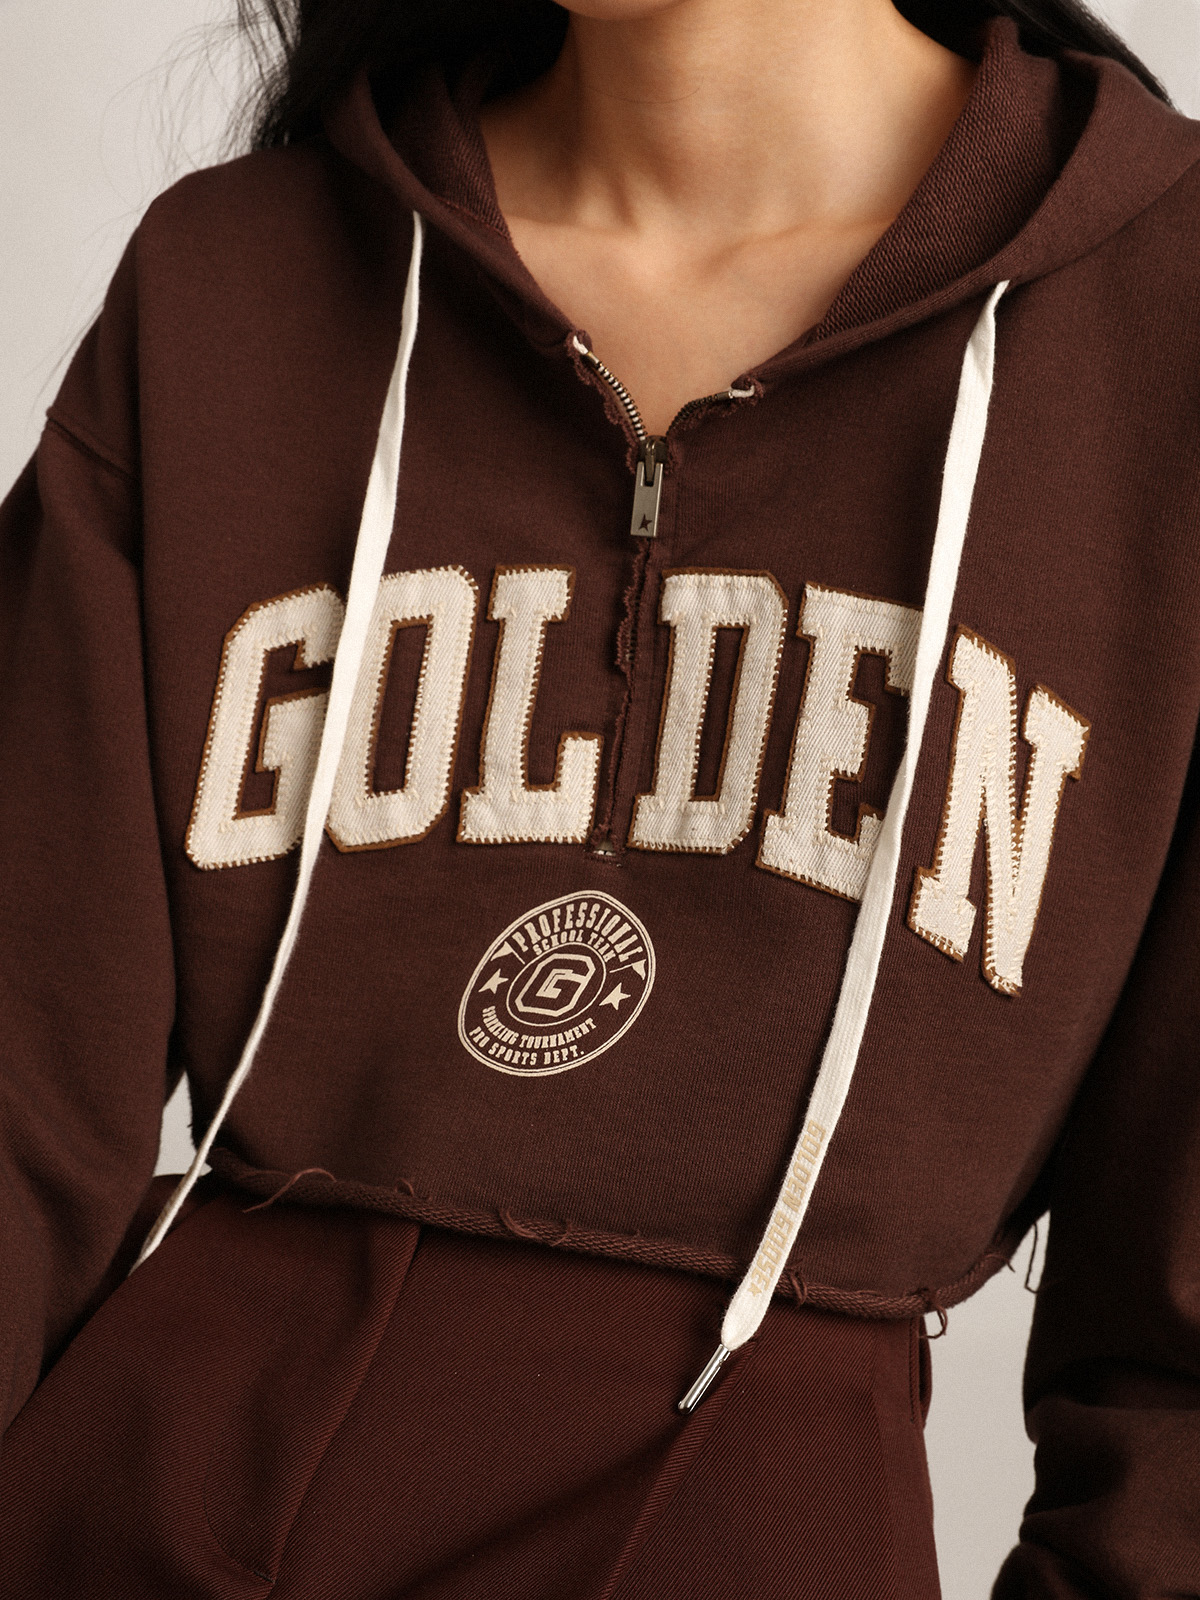 Walnut-brown Journey Collection hooded cropped sweatshirt with